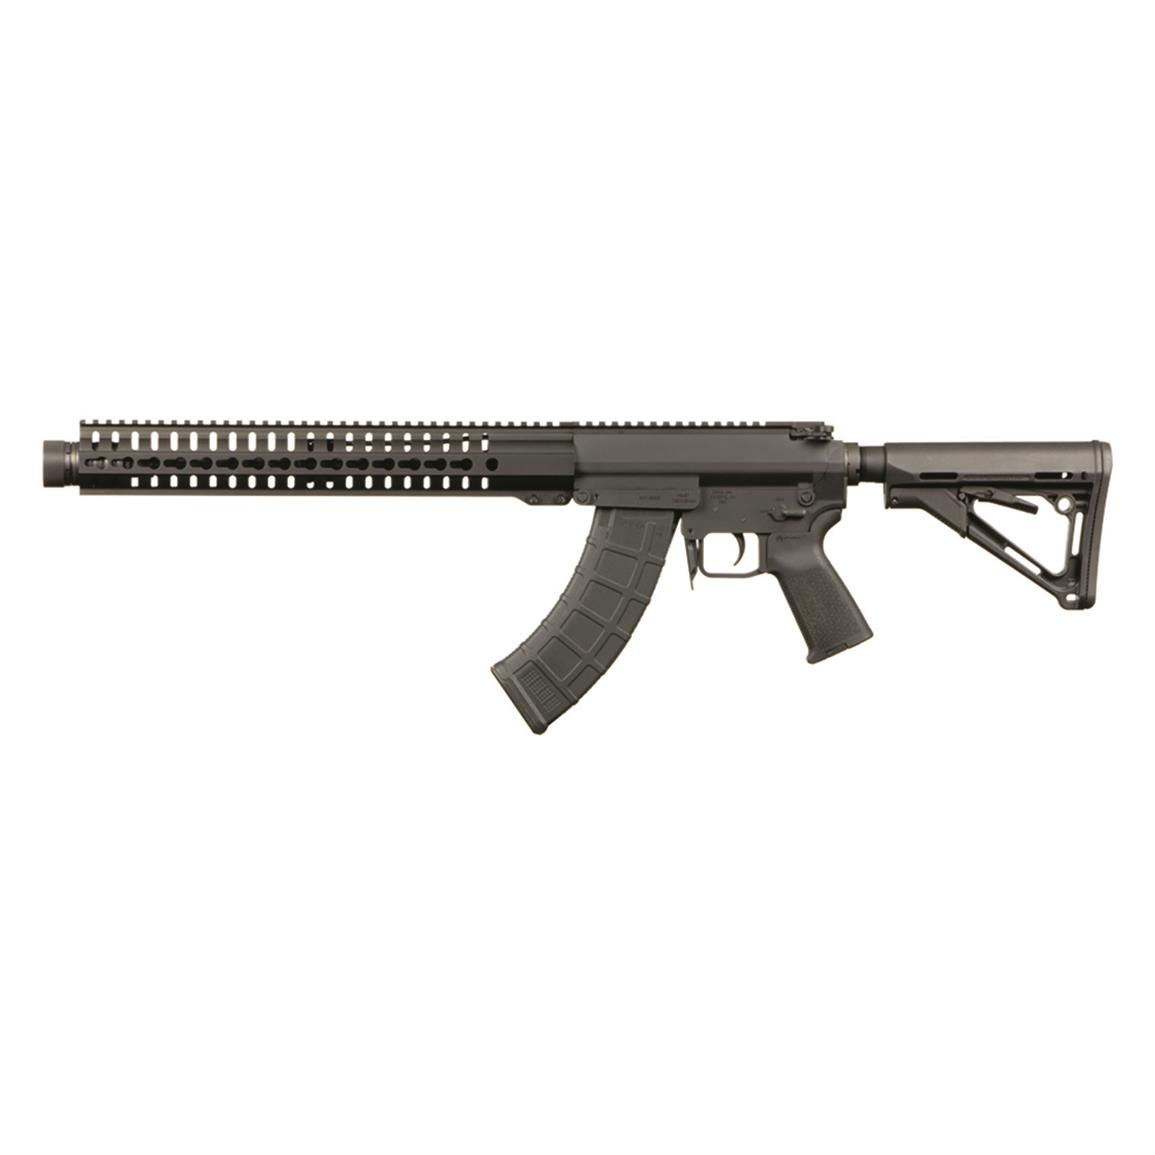 CMMG Mk47 AKS13 Mutant, Semi-Automatic, 7.62x39mm, 13" Barrel with Welded Krink Device, 30+1 Rounds